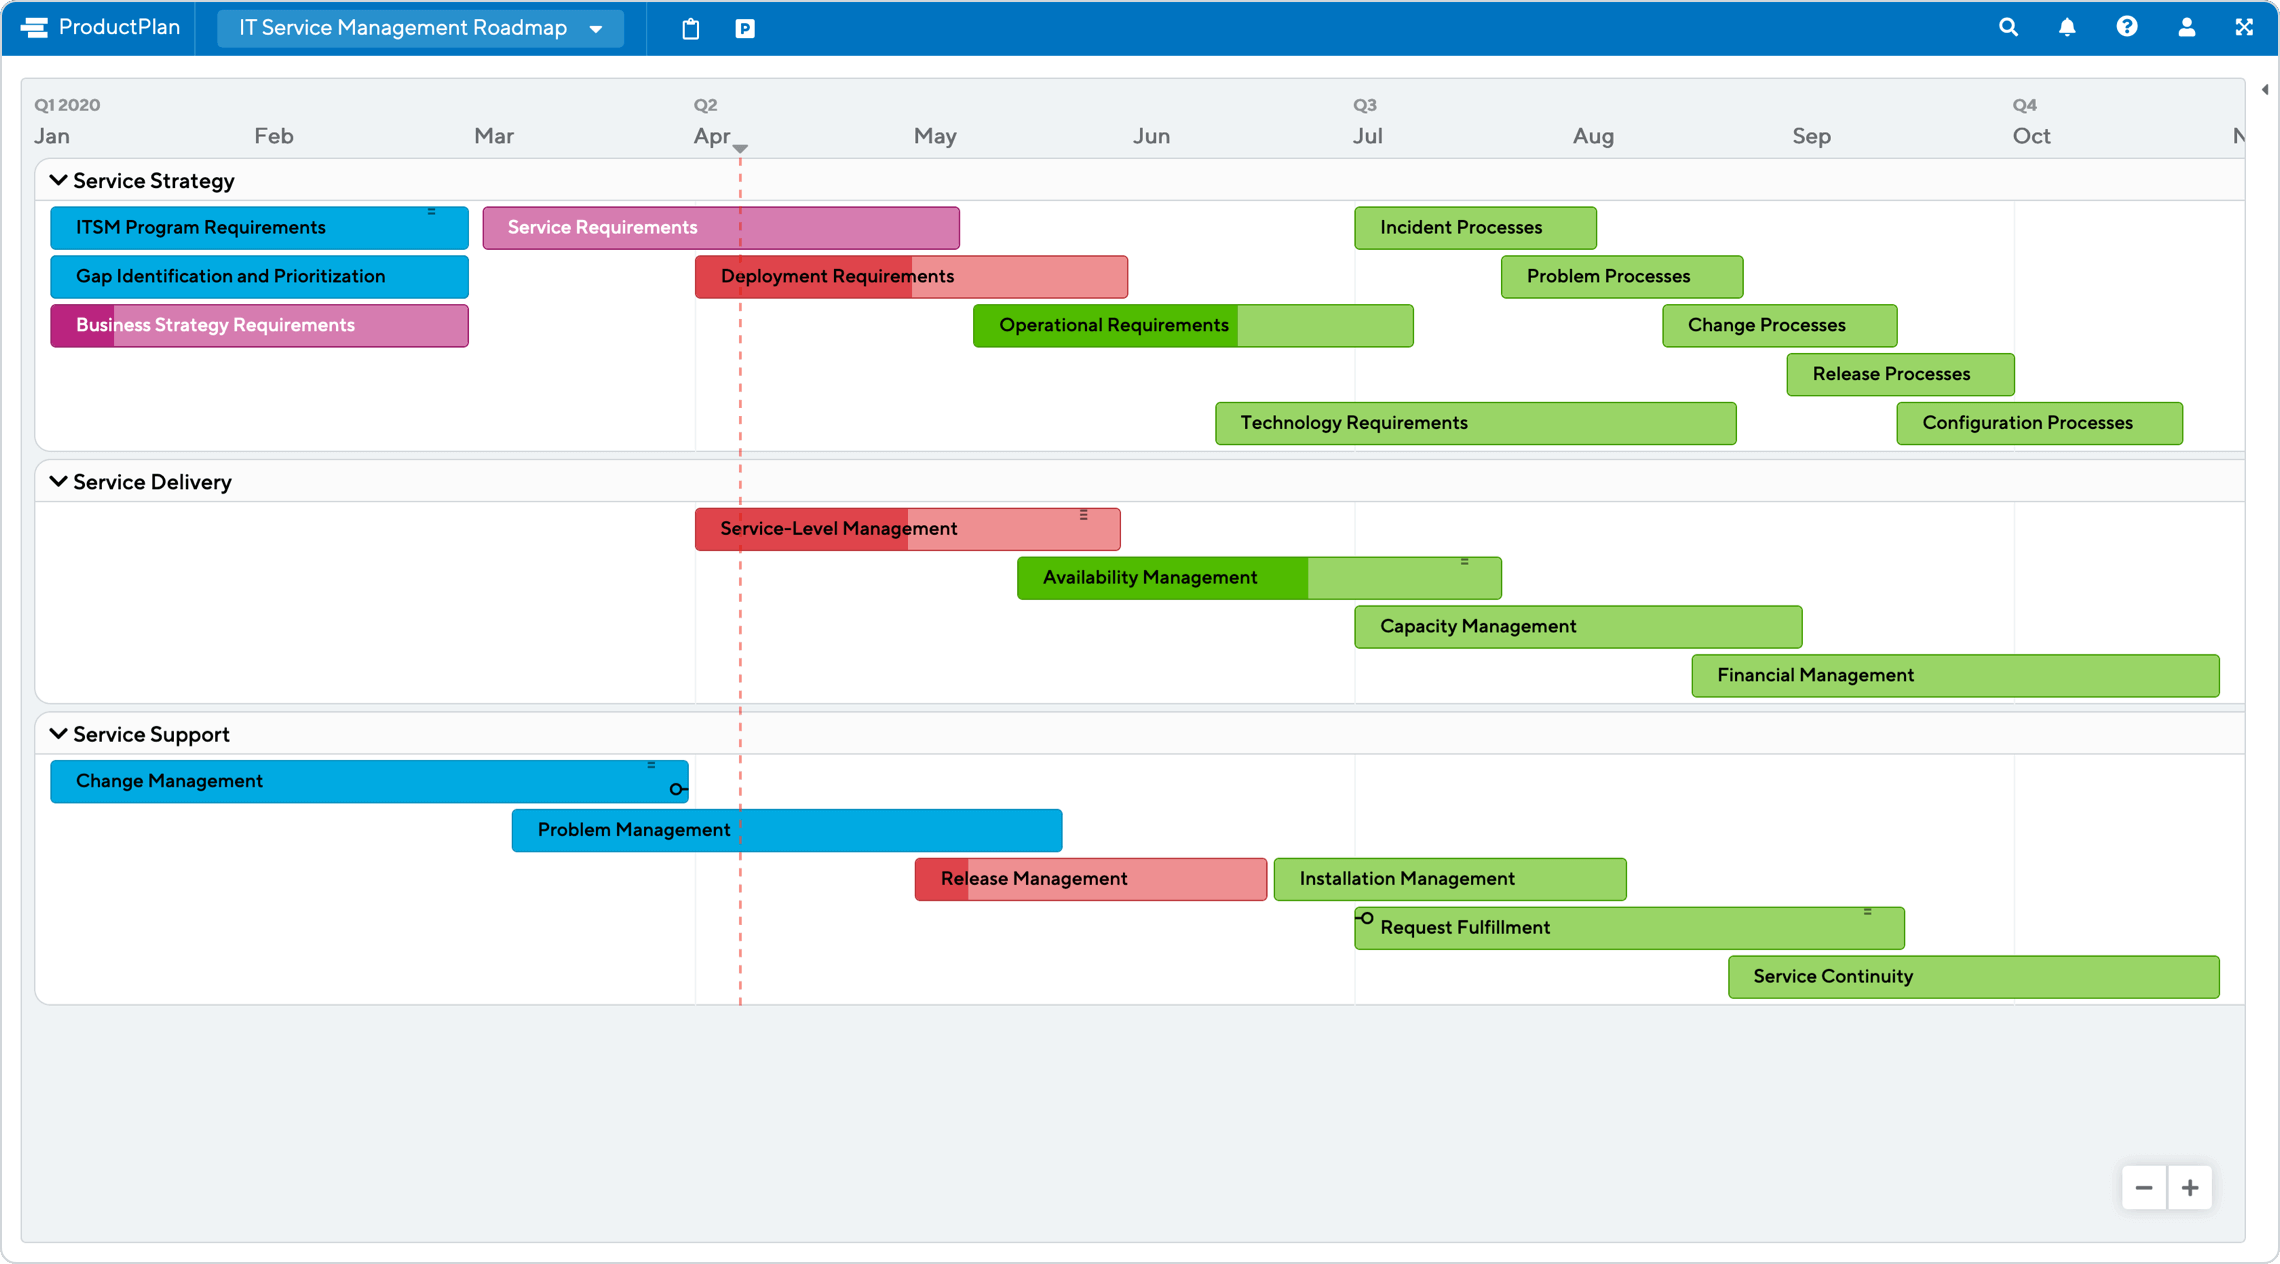 IT Service Management Roadmap Template by ProductPlan